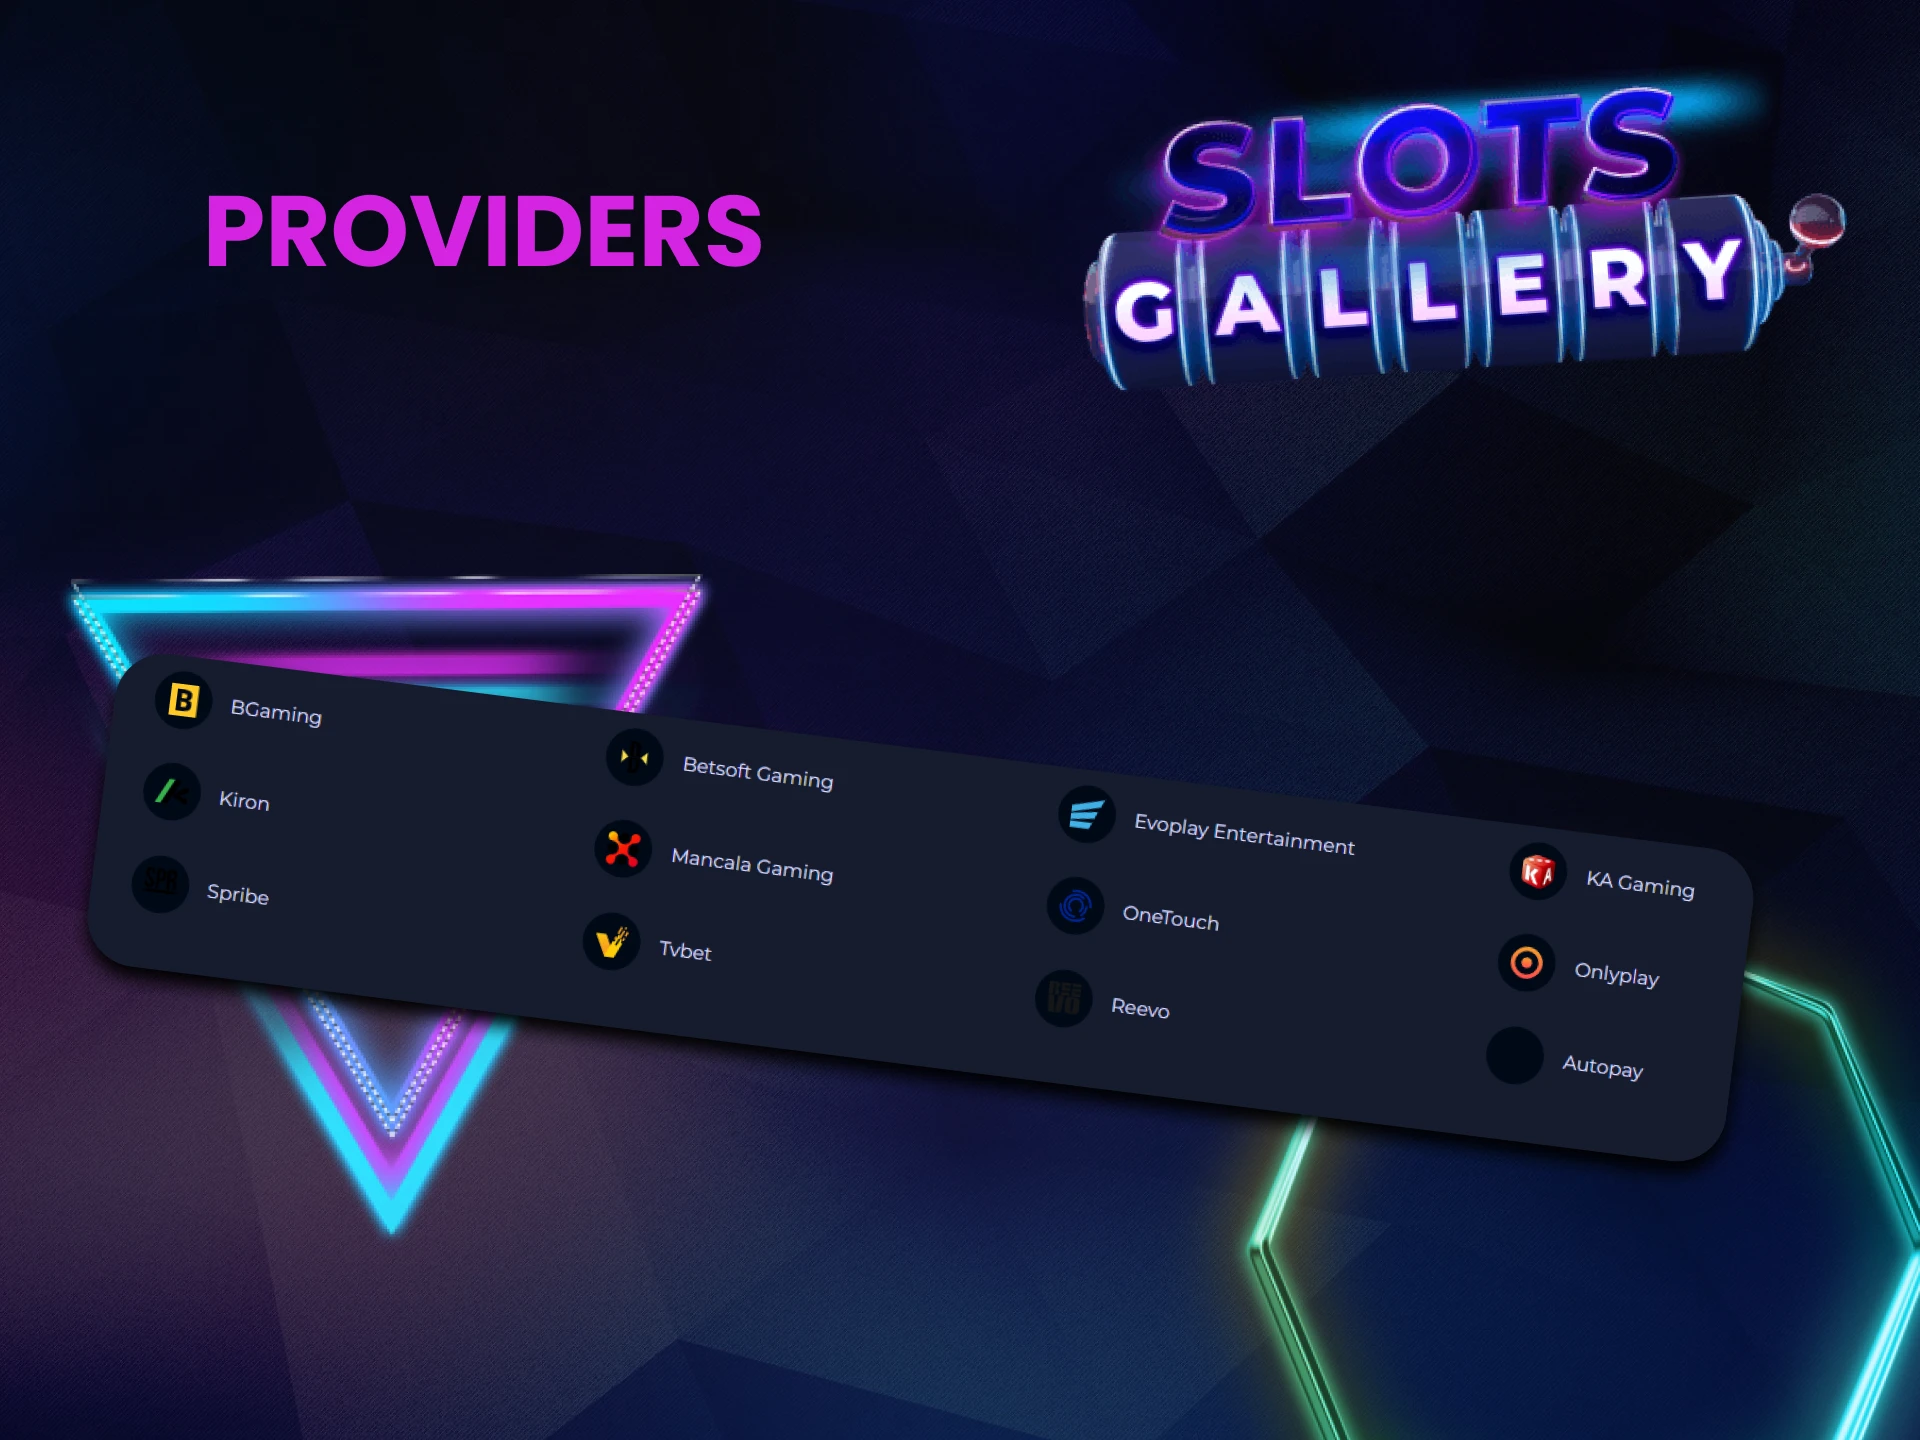 Choose your provider for mini games on Slots Gallery.